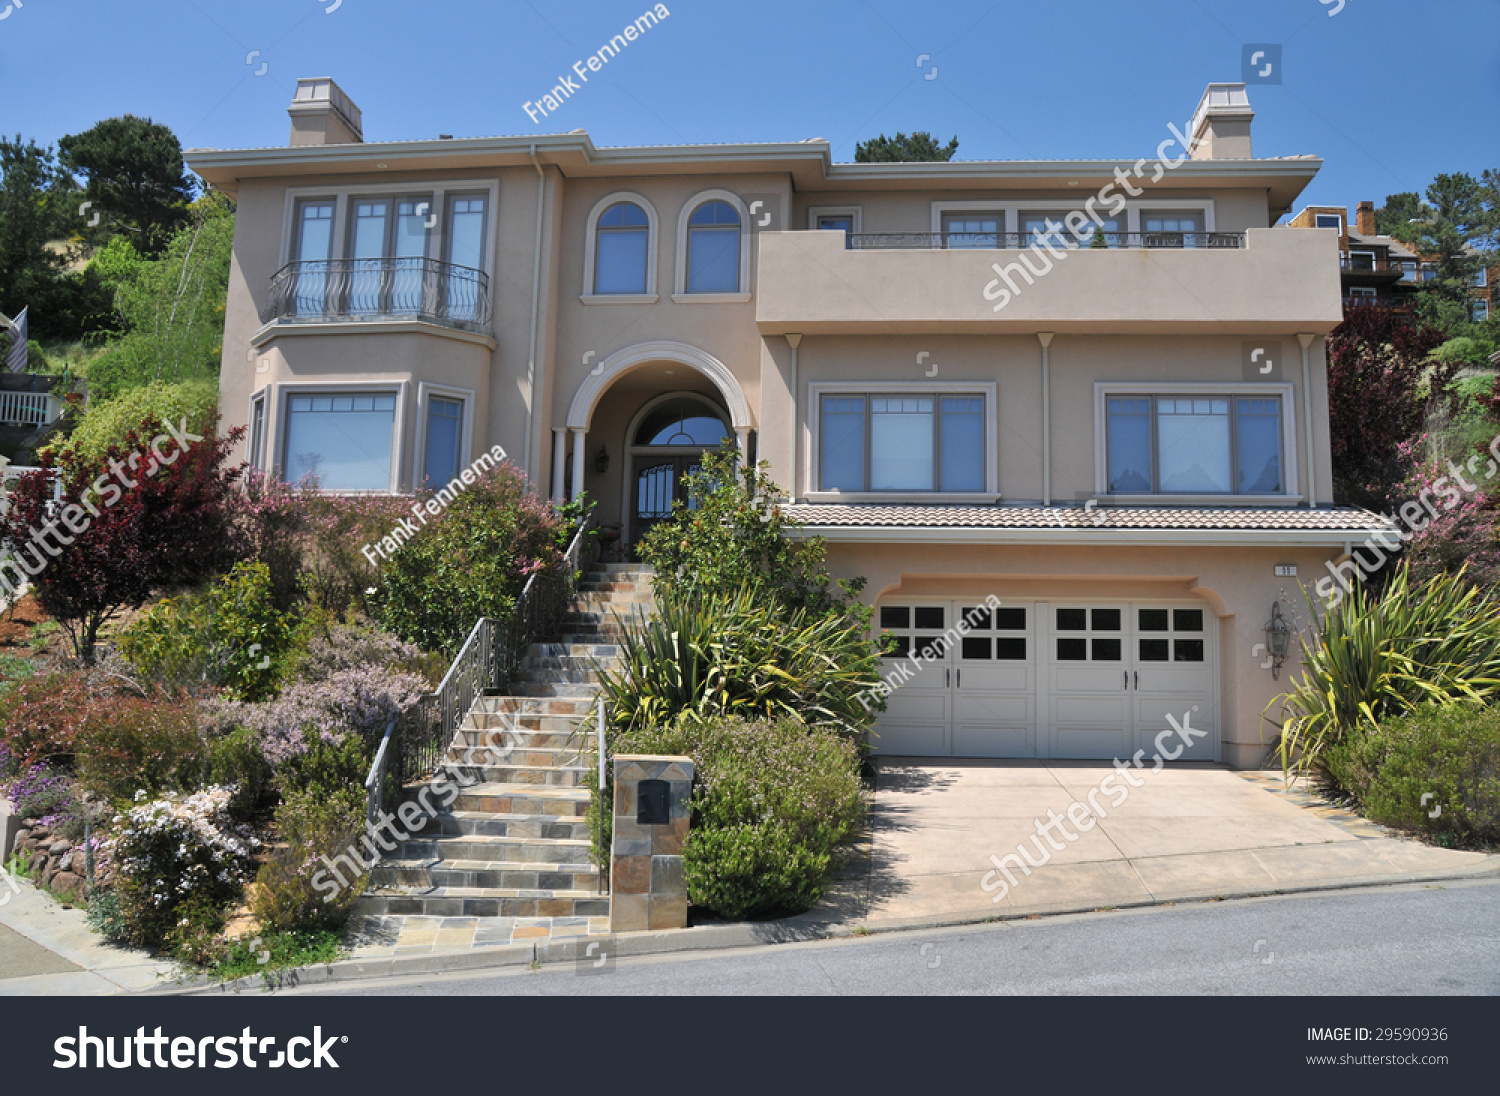 House With Stone Entry Steps Stock Photo 29590936 ...